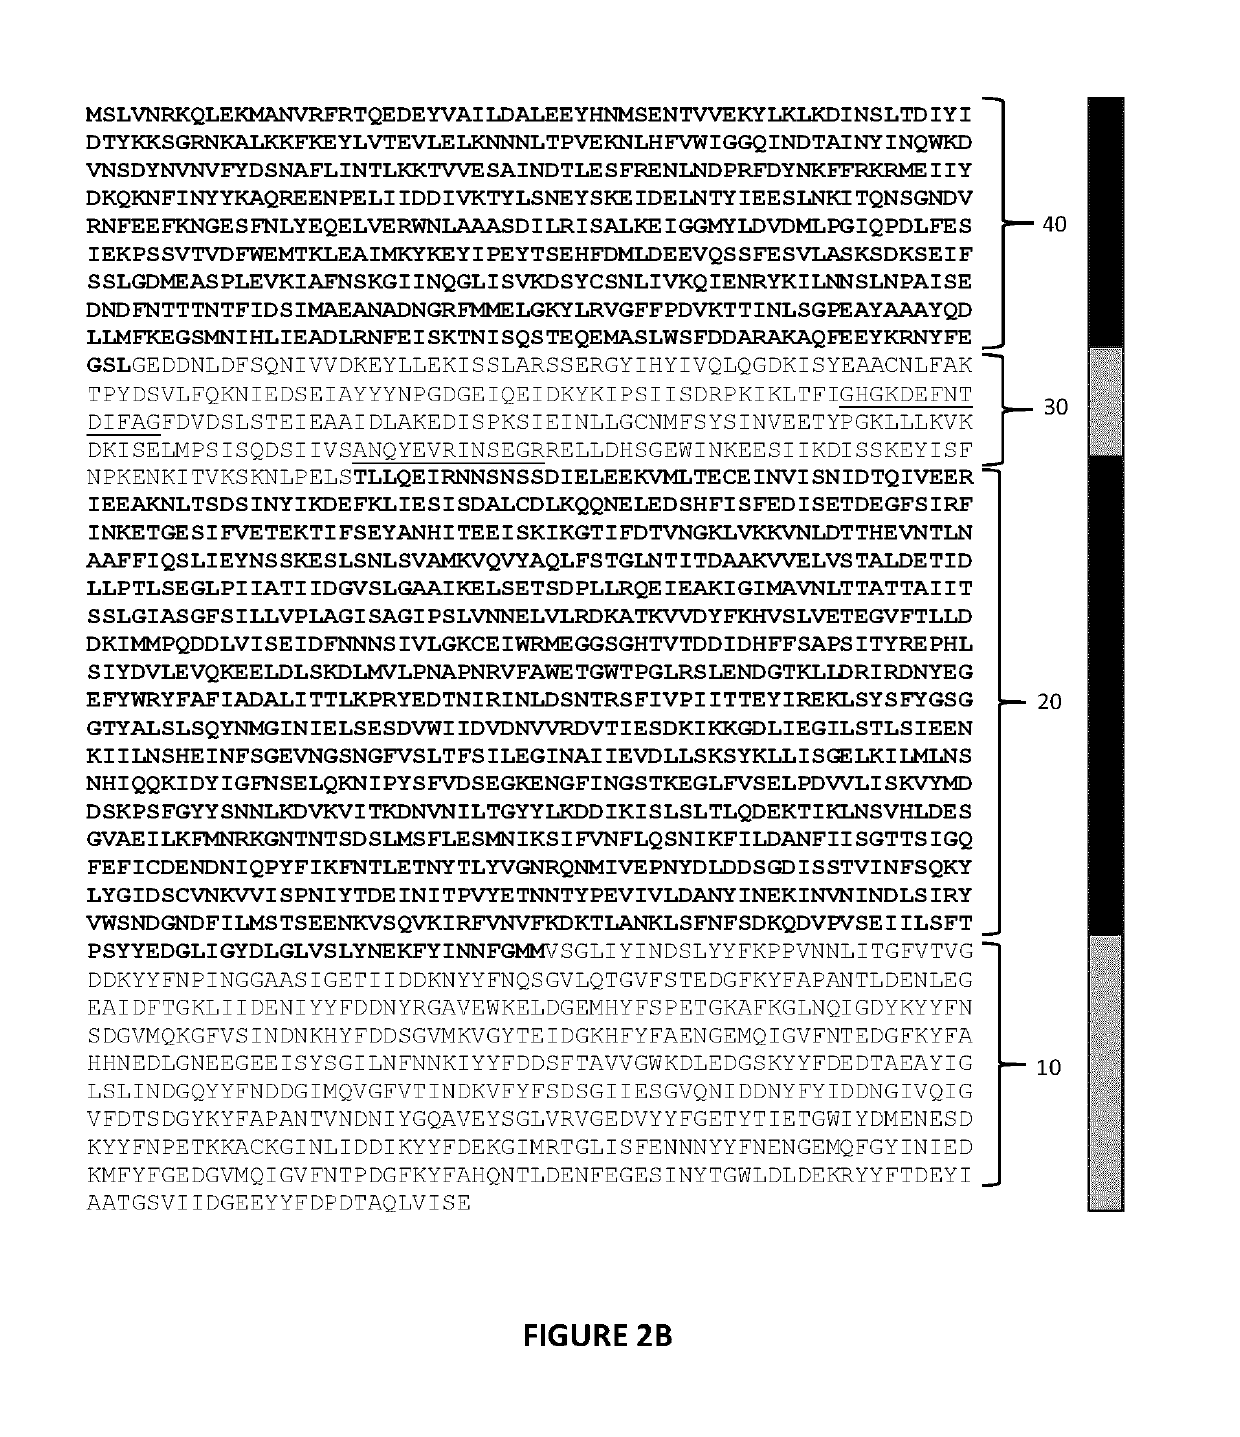 Clostridium difficile toxins a and/or B antigen and epitope antibody, and pharmaceutical uses thereof